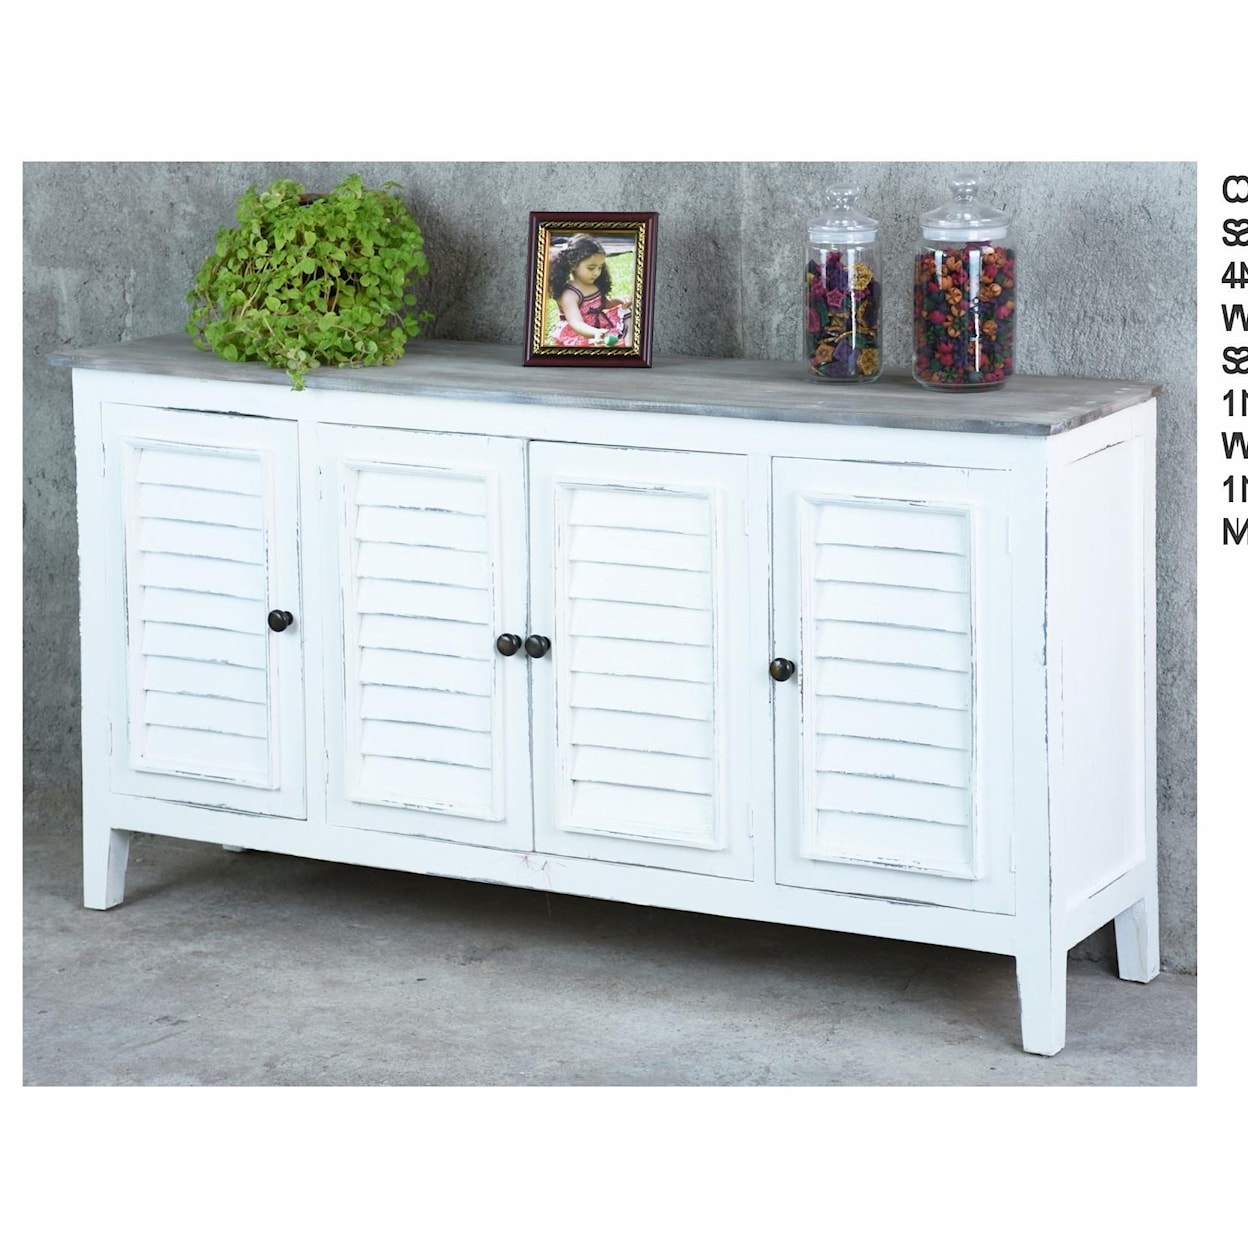 Pacific Paladin Imports Sideboard and Cabinets Shutter Credenza